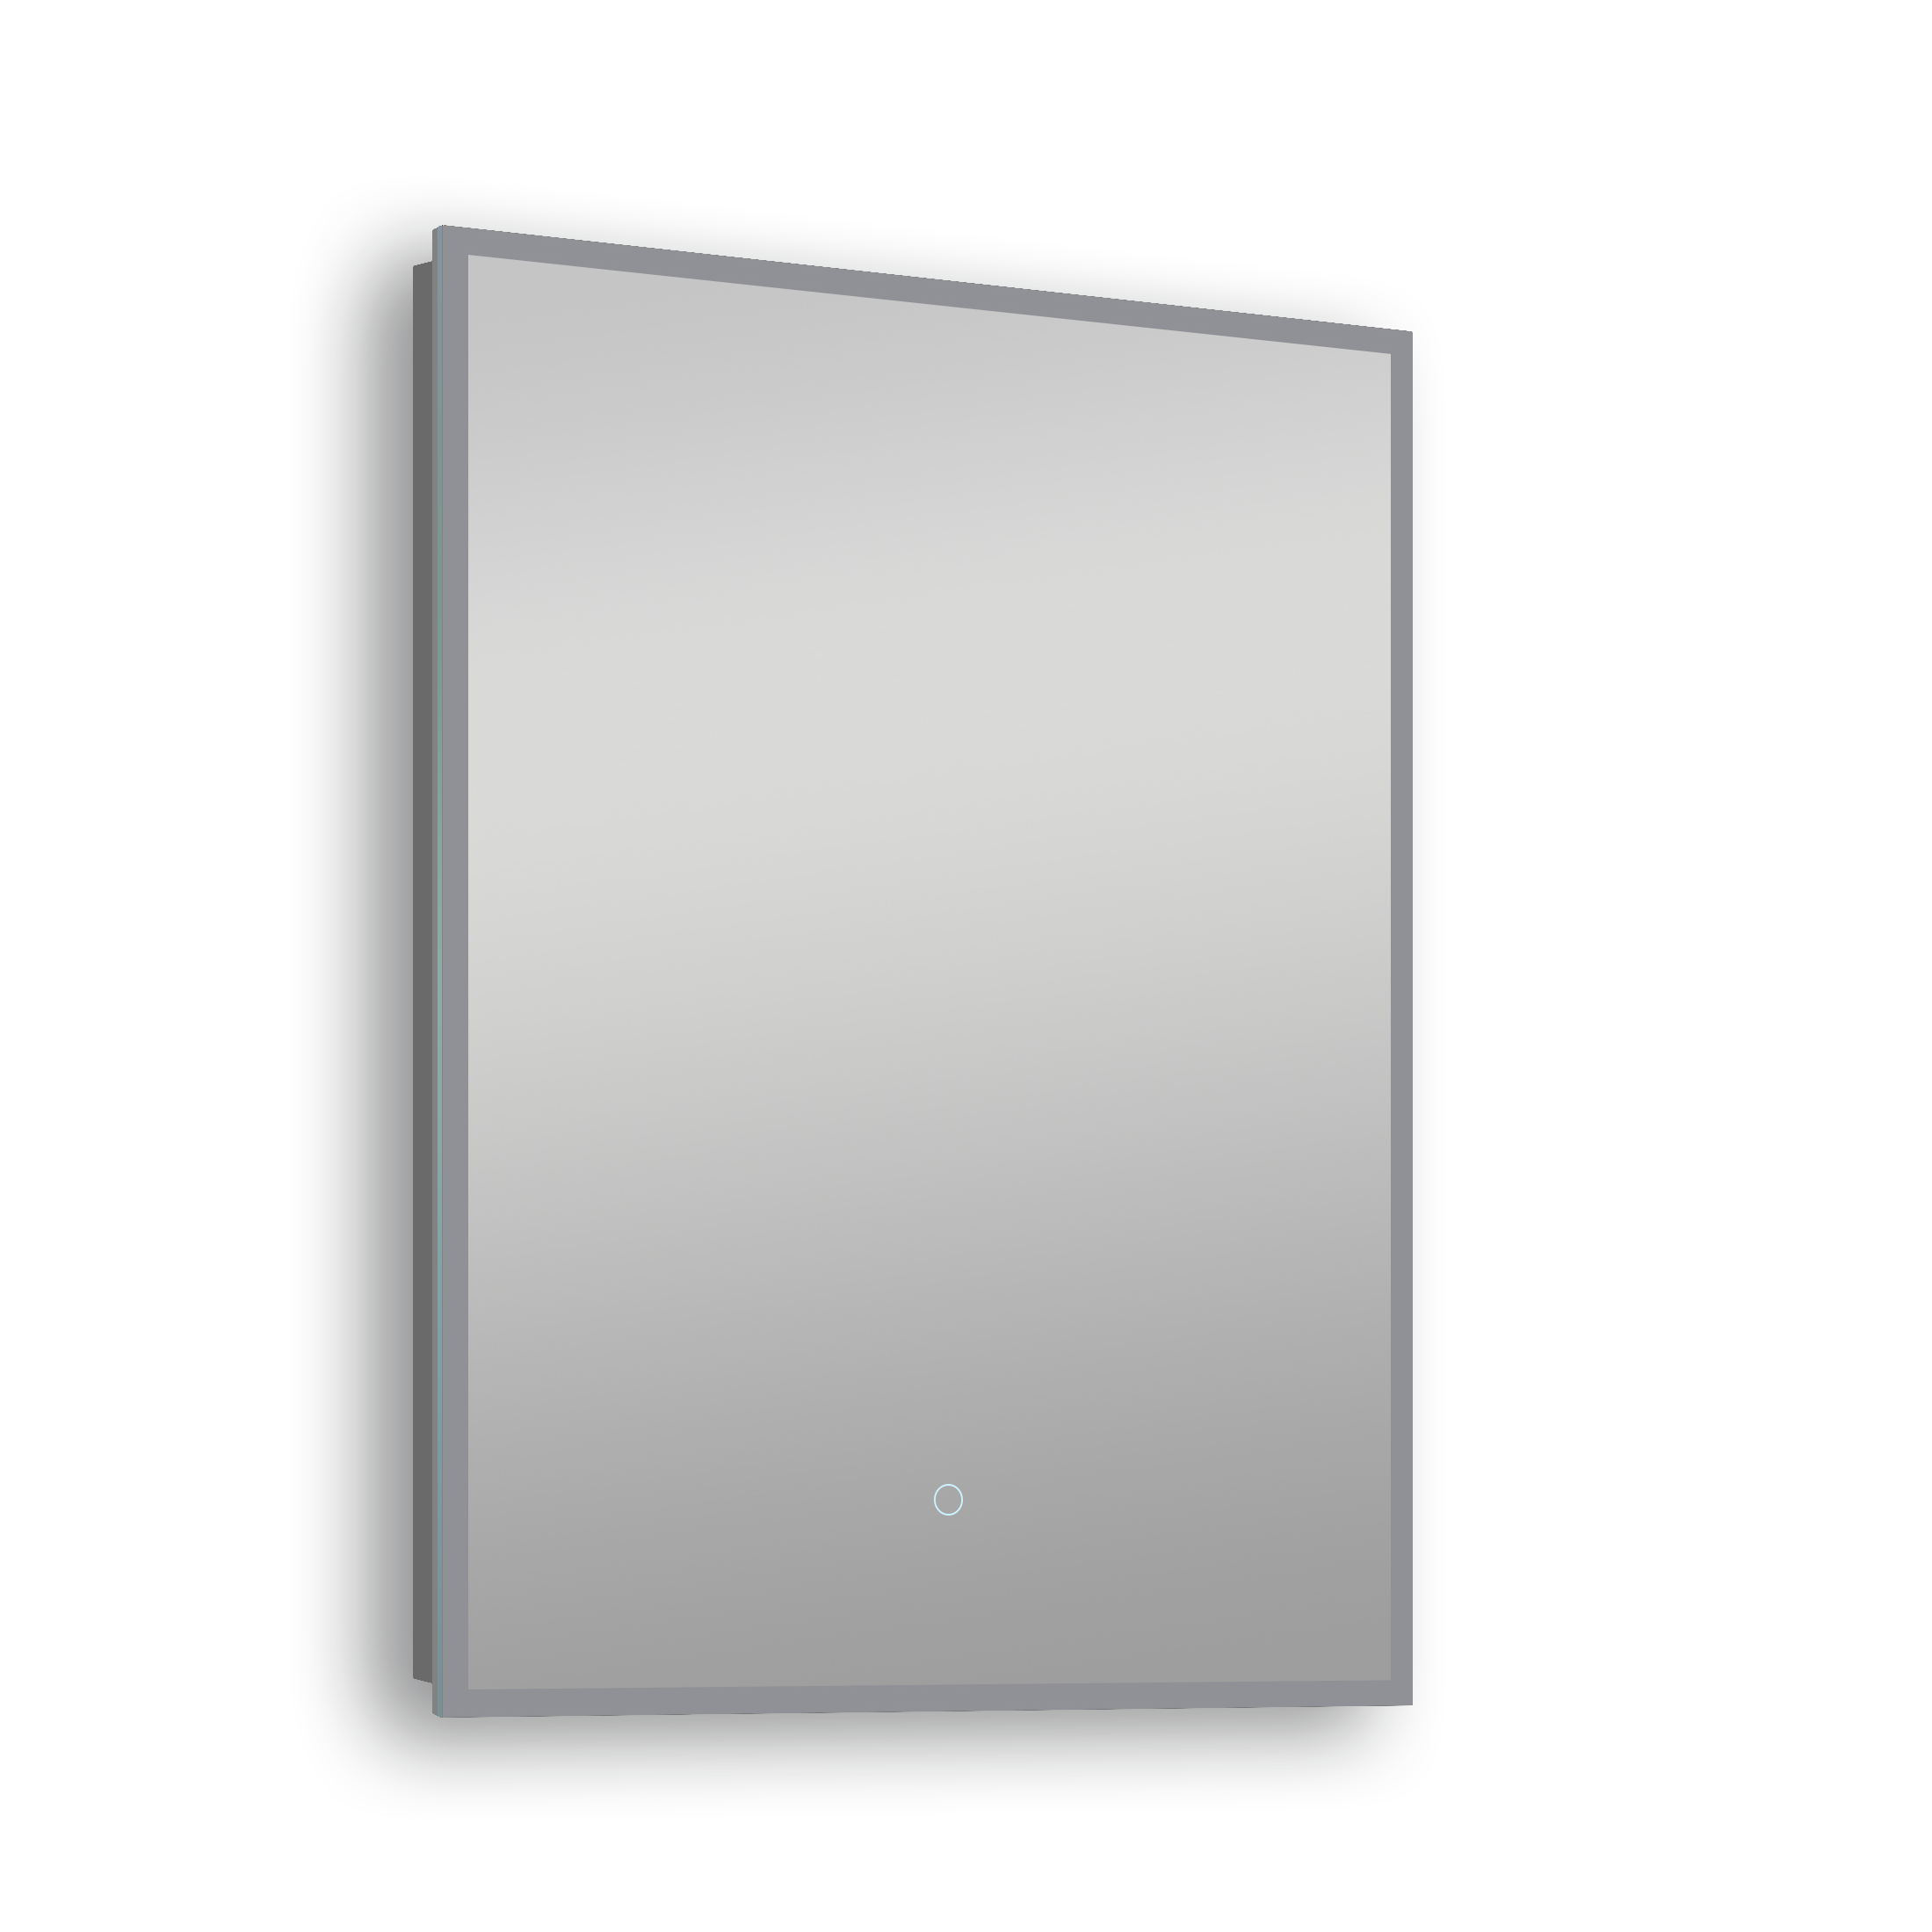 A digital illustration of a modern minimalist, slate-style tablet with a blank screen, featuring clean lines and a single button at the bottom.